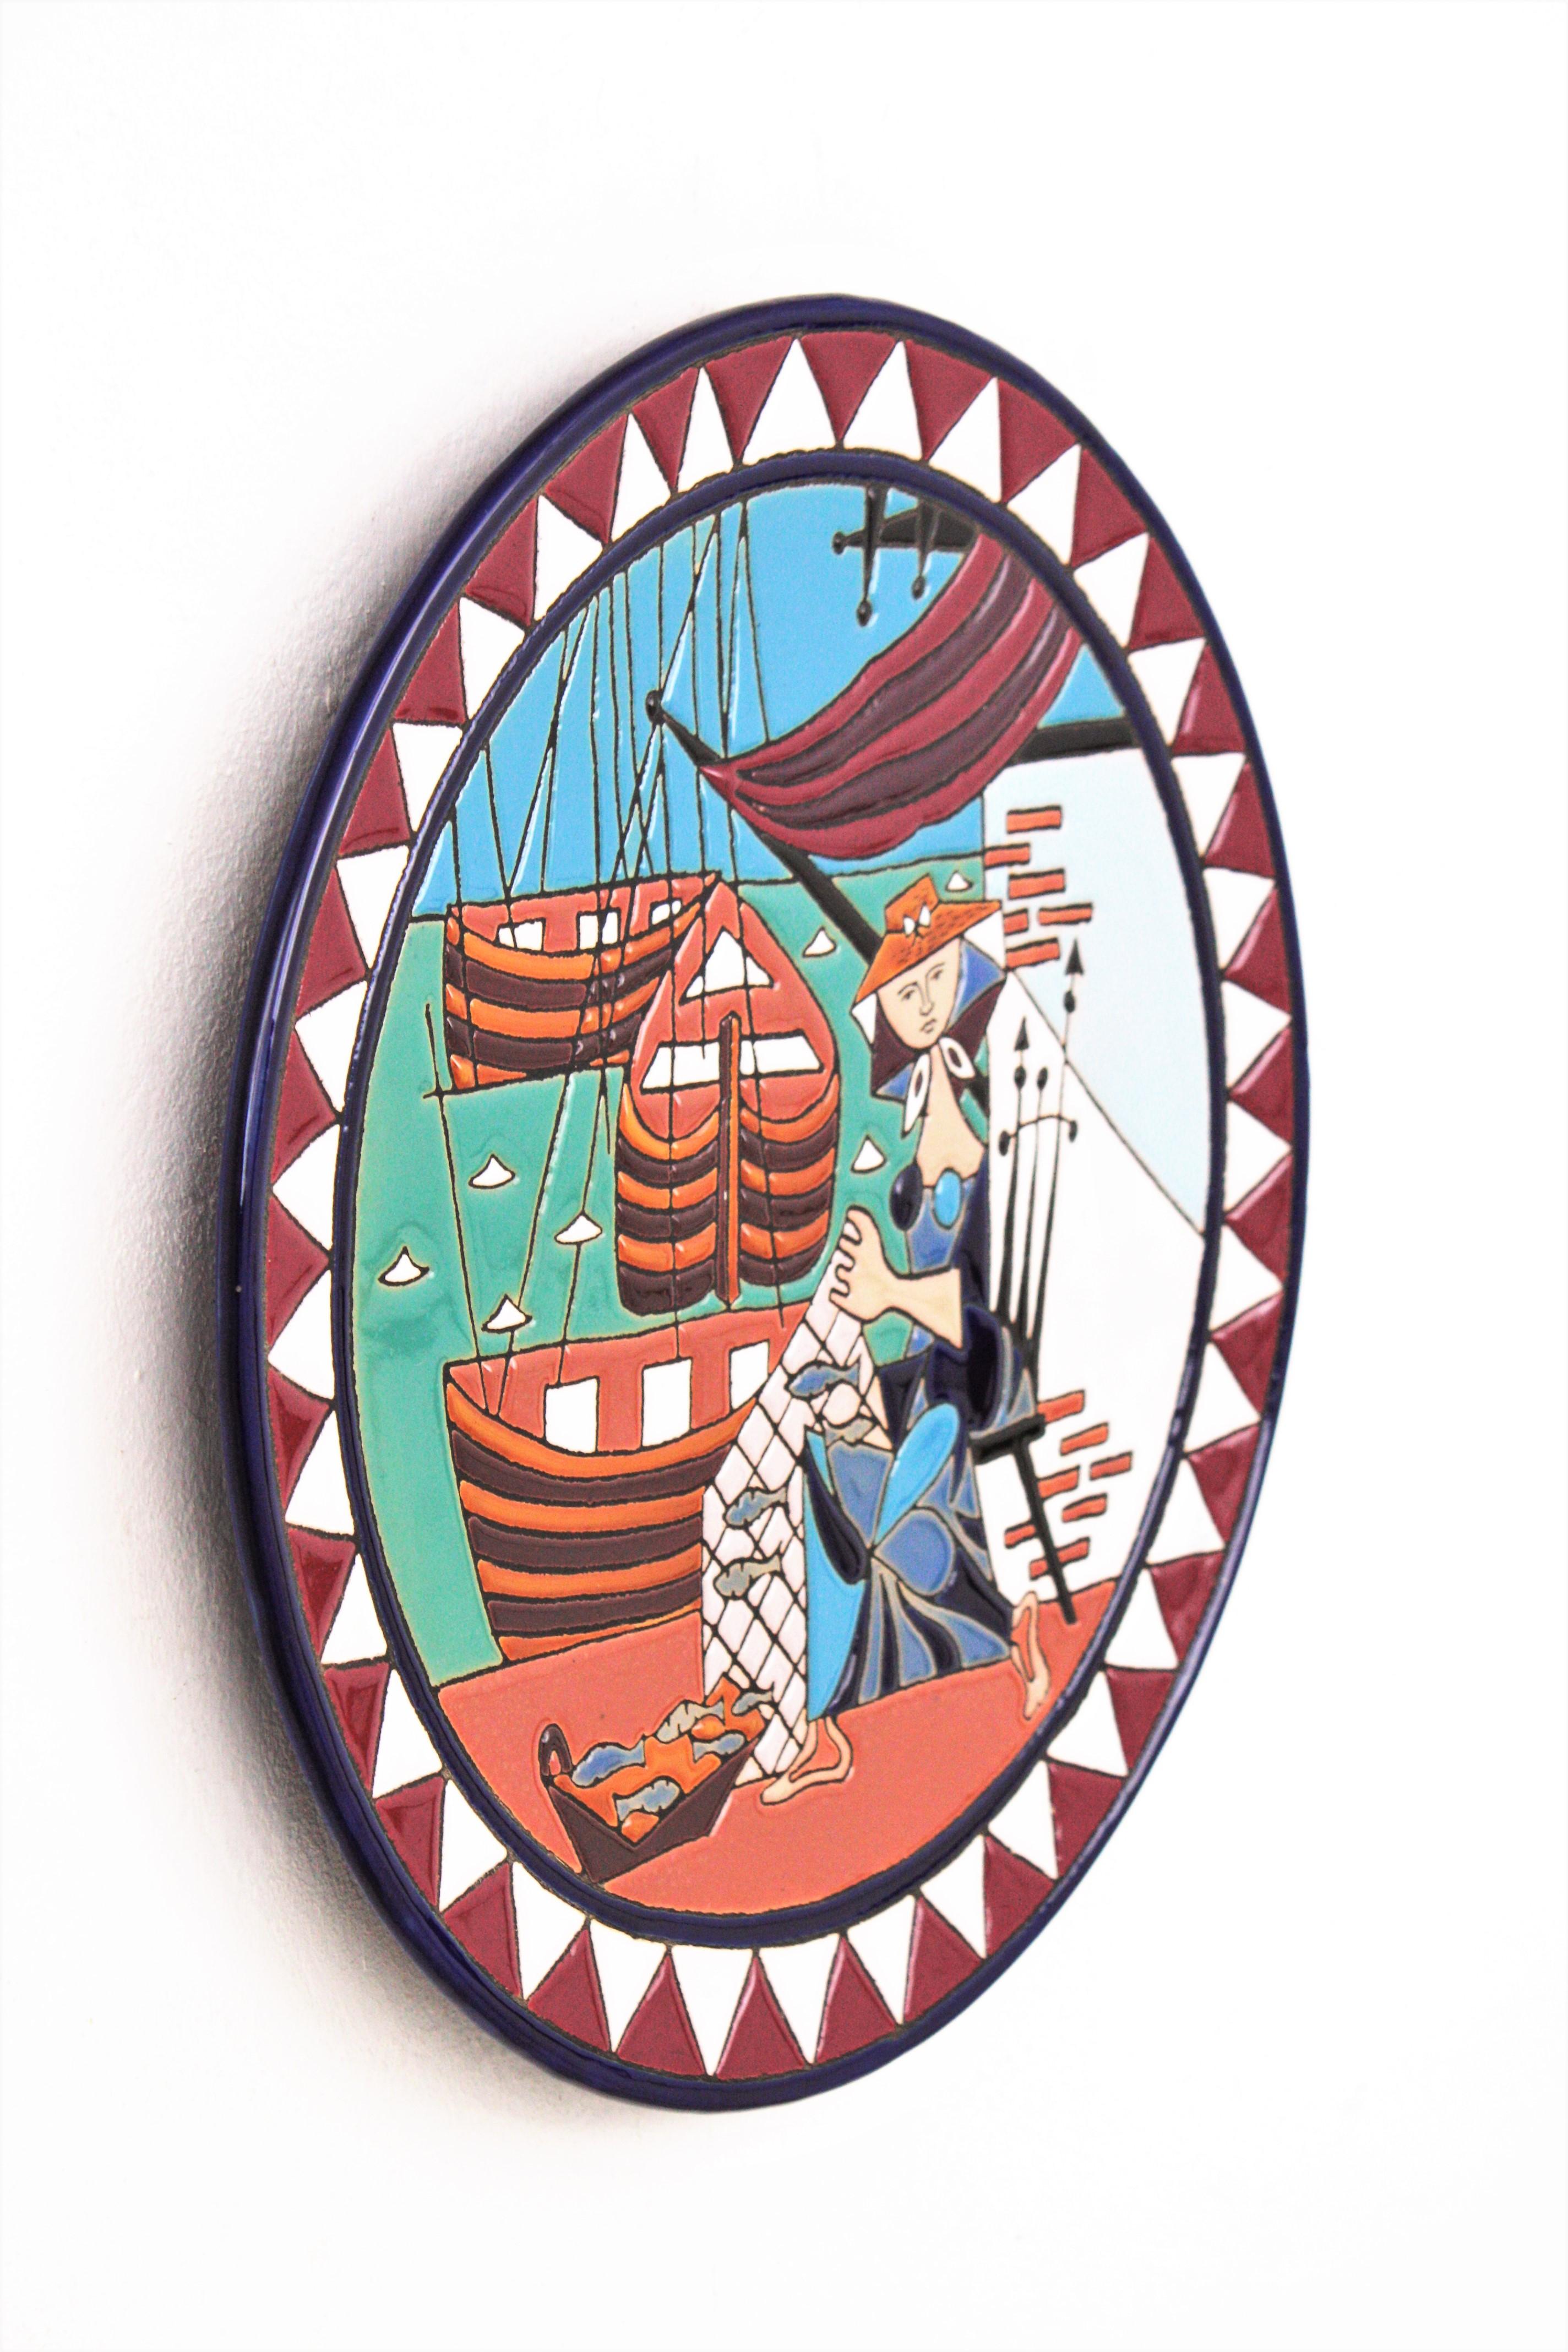 Glazed Spanish Manises Ceramic Decorative Wall Plate with Fishing Scene, 1960s For Sale